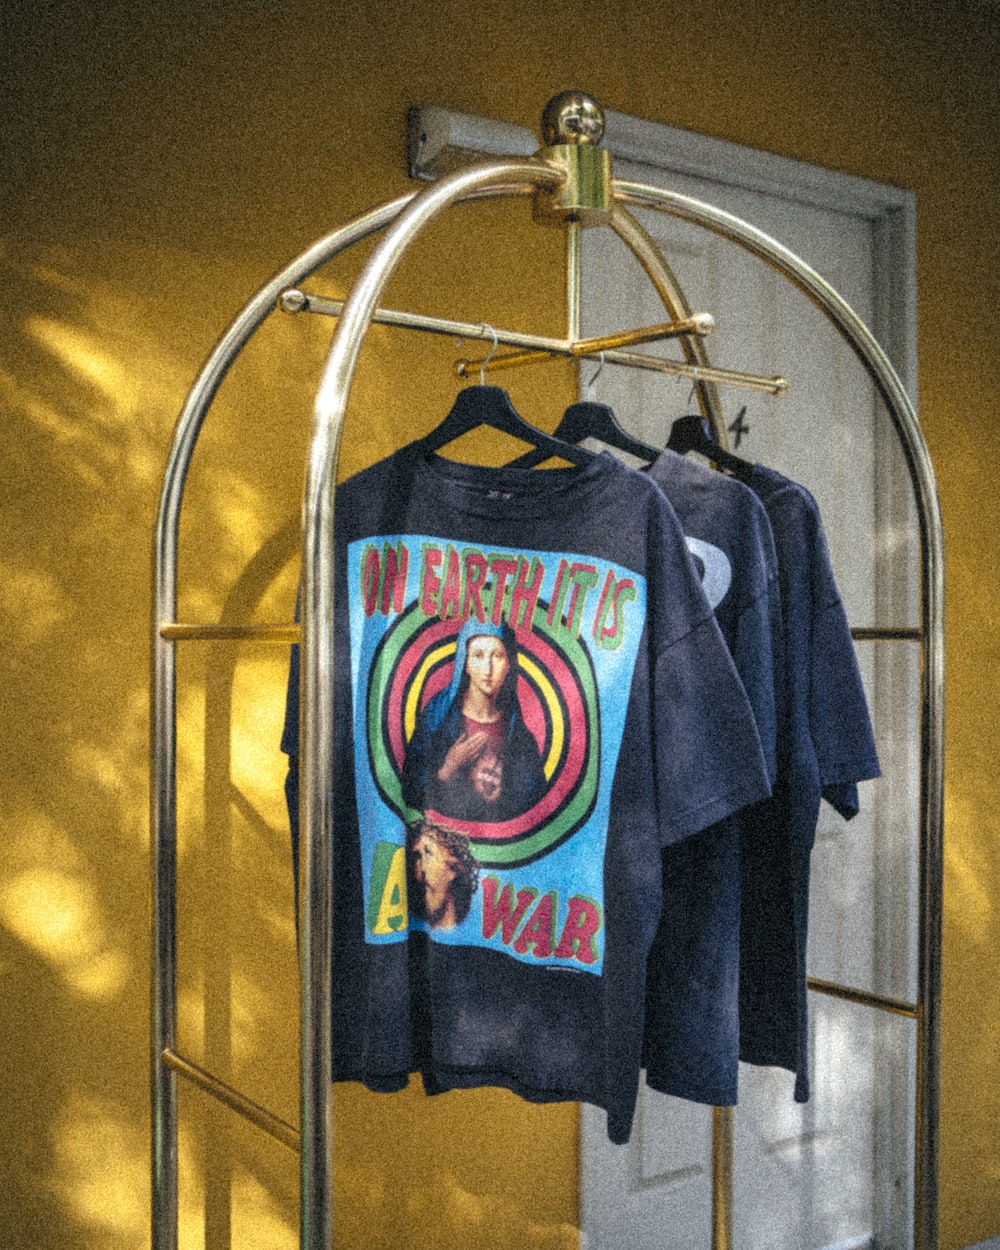 SAINT MICHAEL 2024SS - The last items from the SAINT Mxxxxxx 2024 Spring/Summer Collection are now available! In-store and online sales start at 10:00 AM, Japan Standard Time on May 18th (Sat.)! - SM-YS8-0000-002(ON EARTH Short Sleeve T-shirt) - 1-001